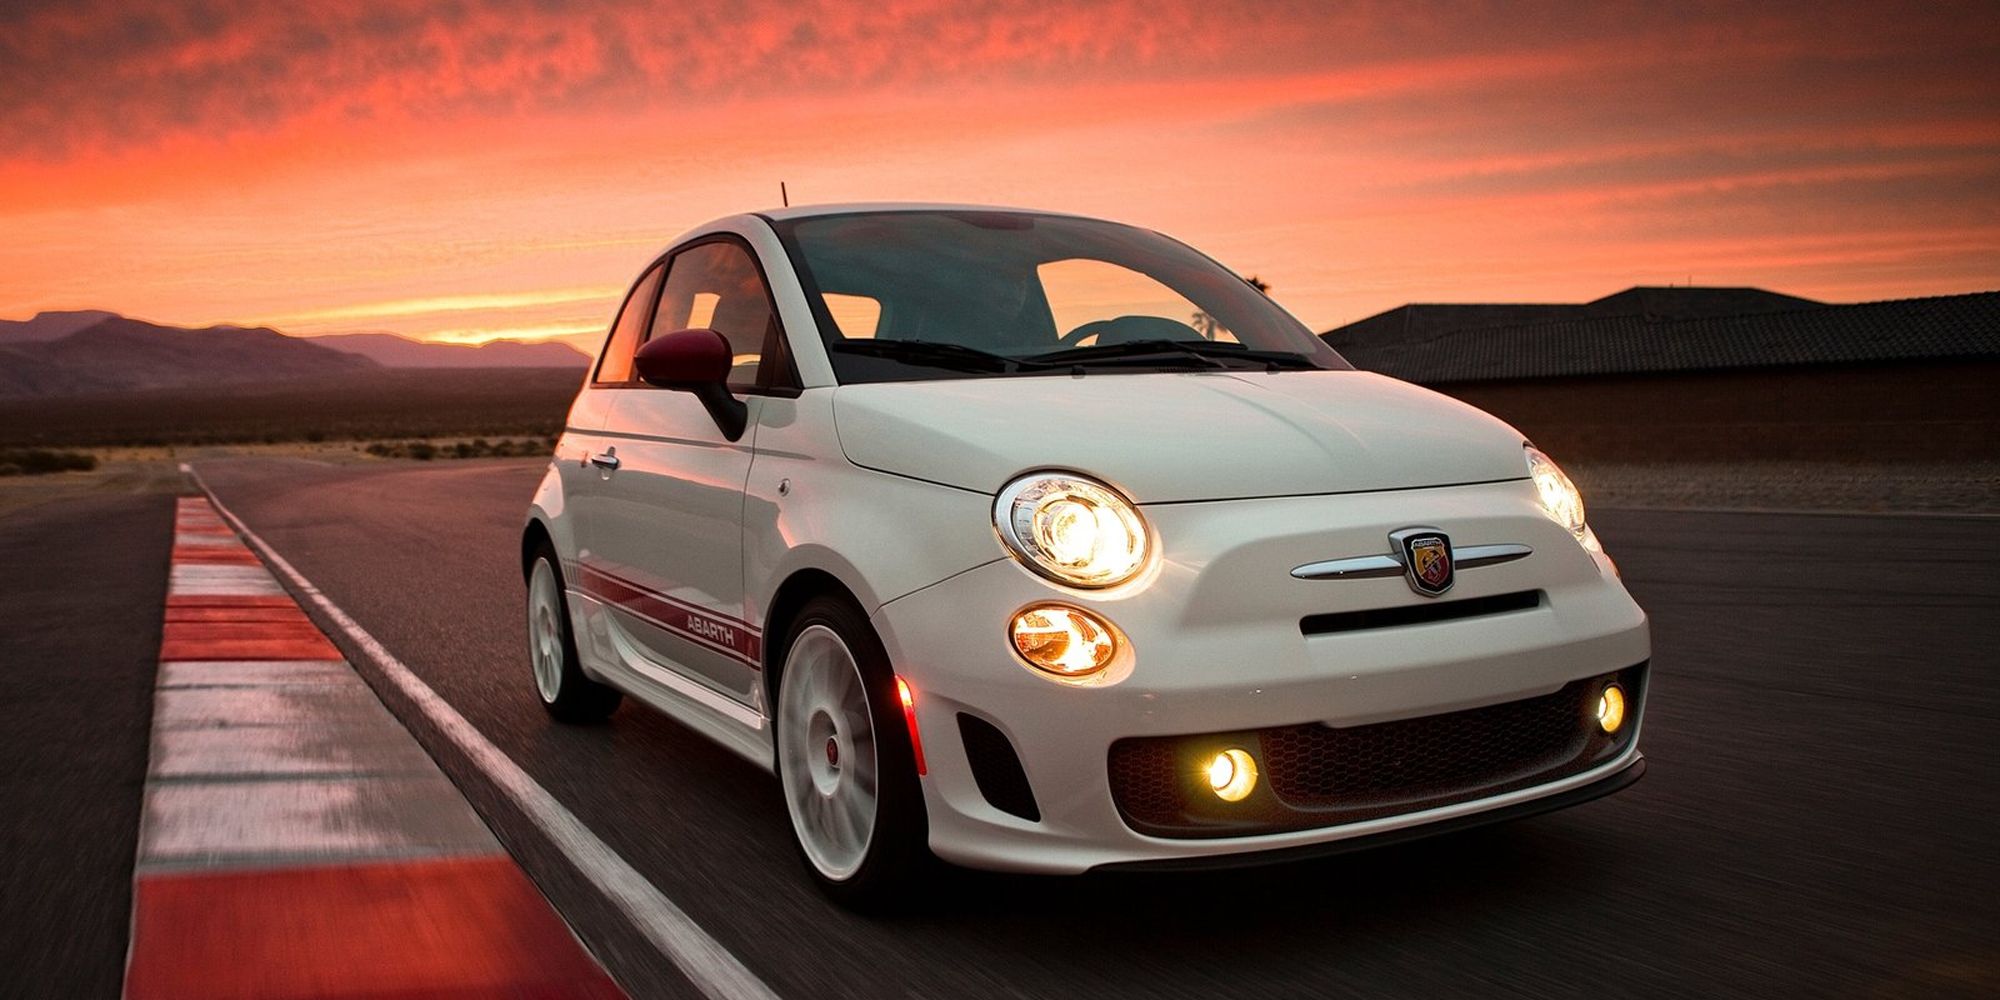 The front of a white 500 Abarth on track